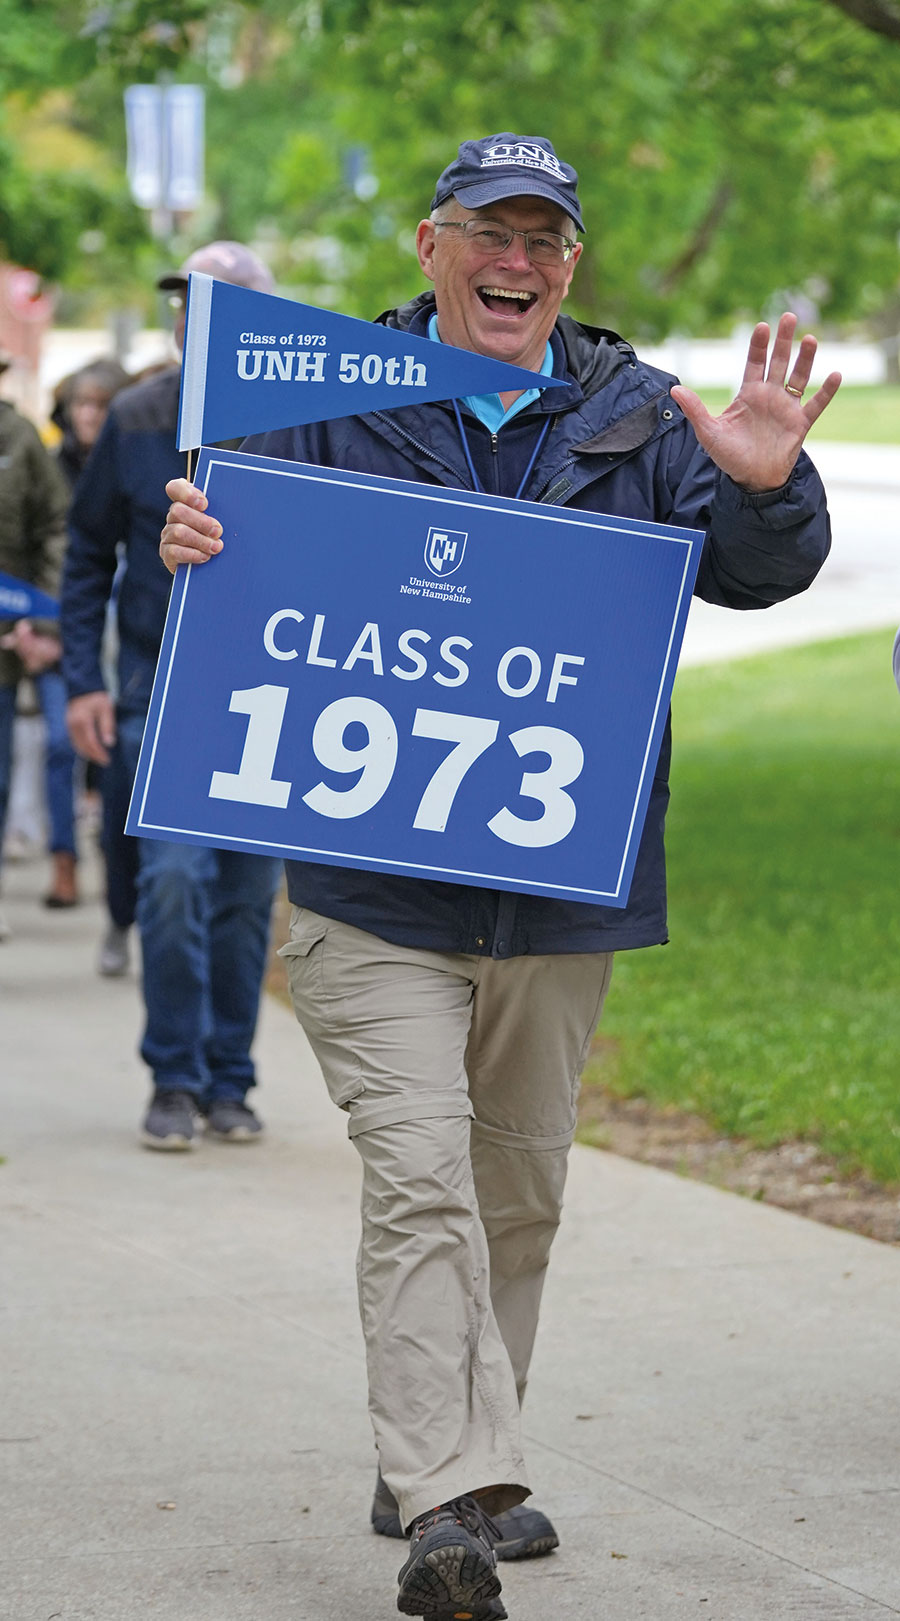 Man in UNH hat and prescription glasses in foreground walking on a sidewalk portion of the UNH campus smiling and laughing as he waves holding a blue/white Class of 1973 UNH 50th pennant banner and UNH Class of 1973 yard sign as there are other people in background walking behind him also